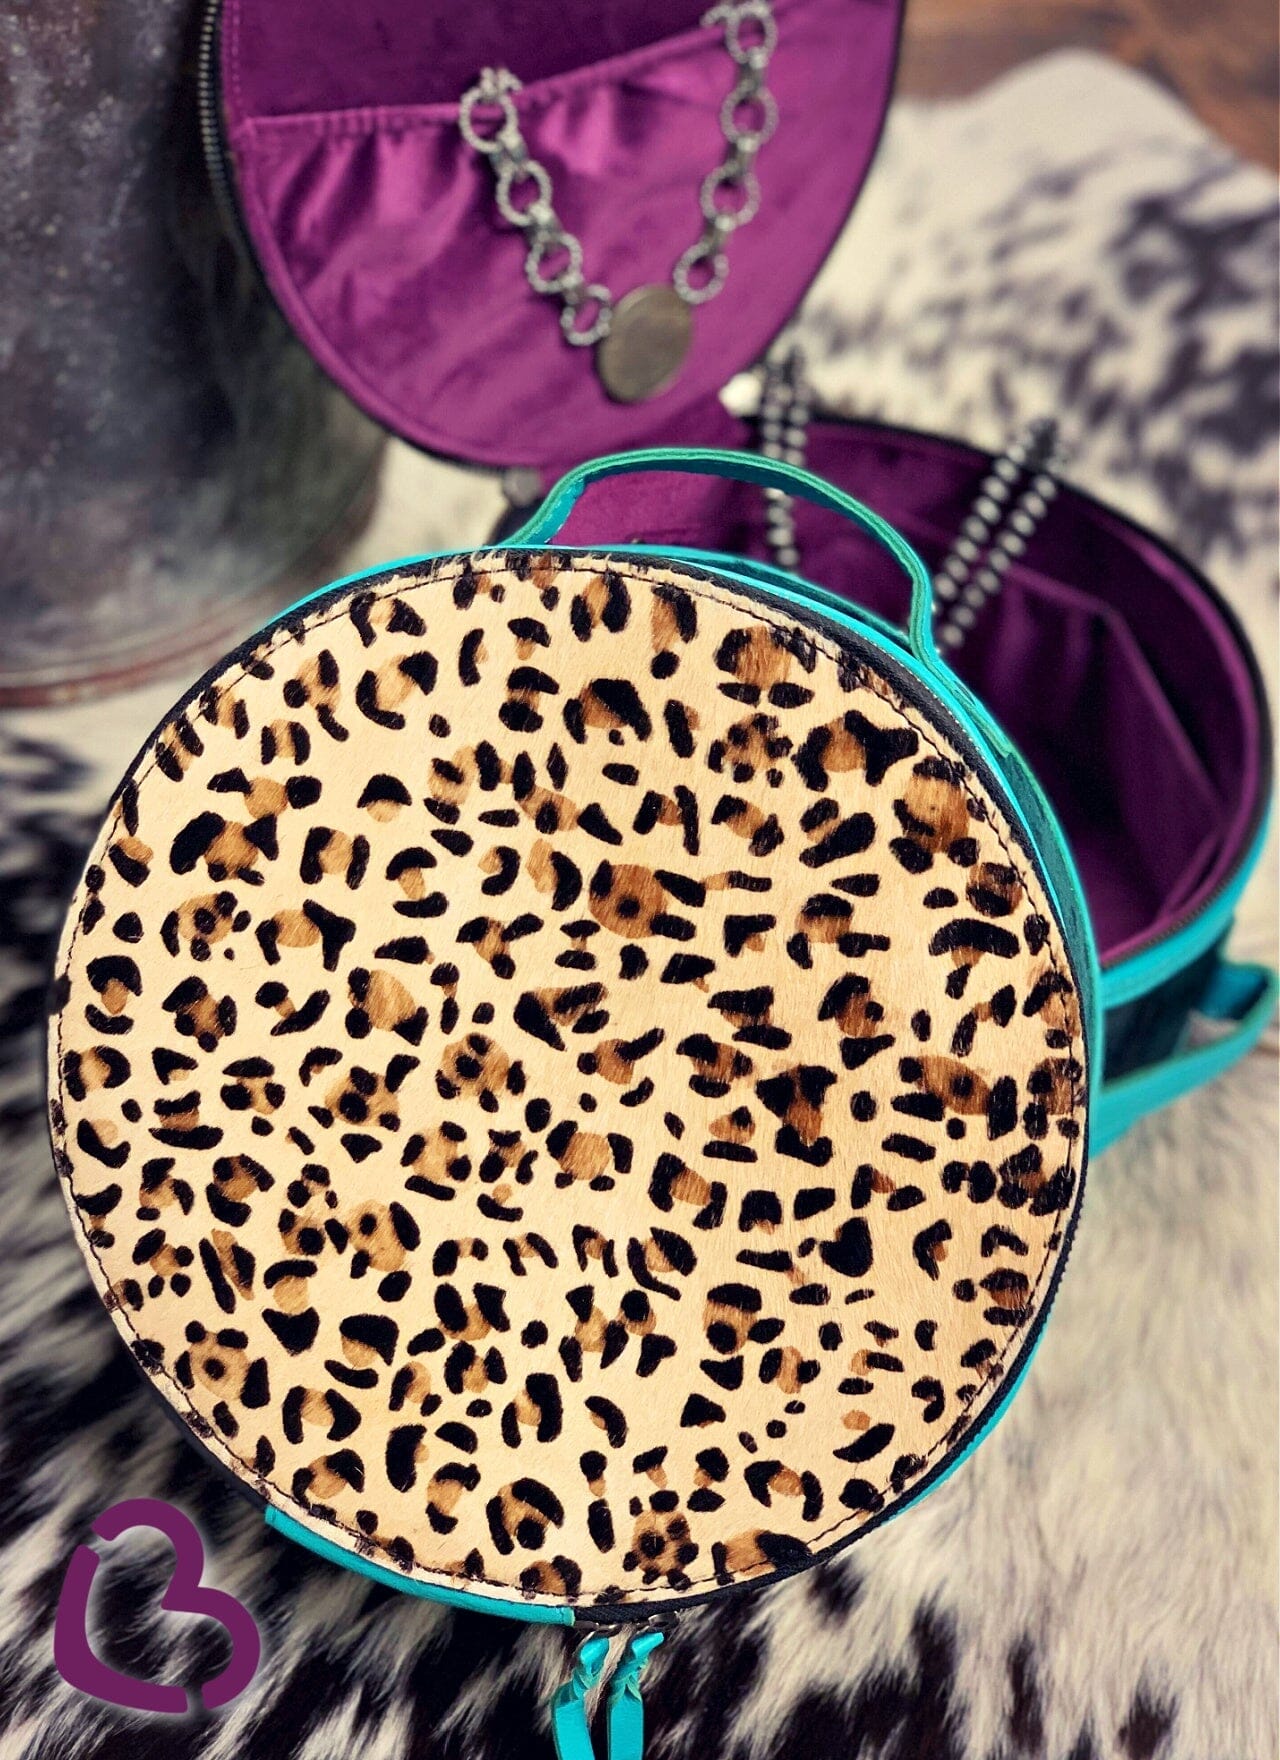 A Walk On The Wild Side Round Jewelry Case Handbags & Clutches 144 